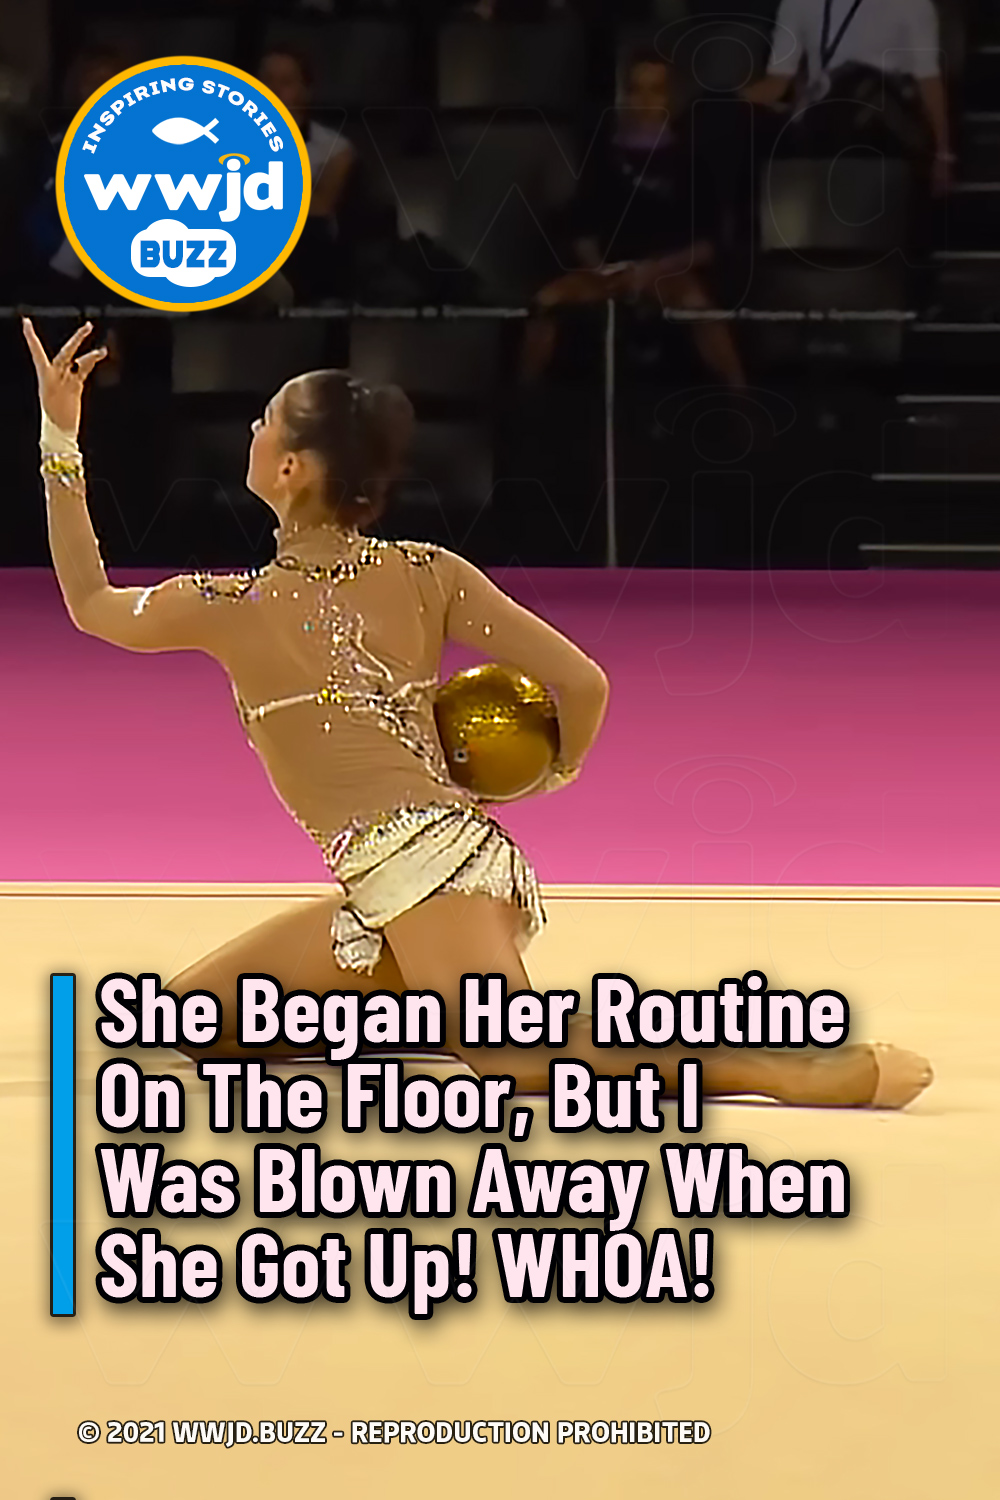 She Began Her Routine On The Floor, But I Was Blown Away When She Got Up! WHOA!